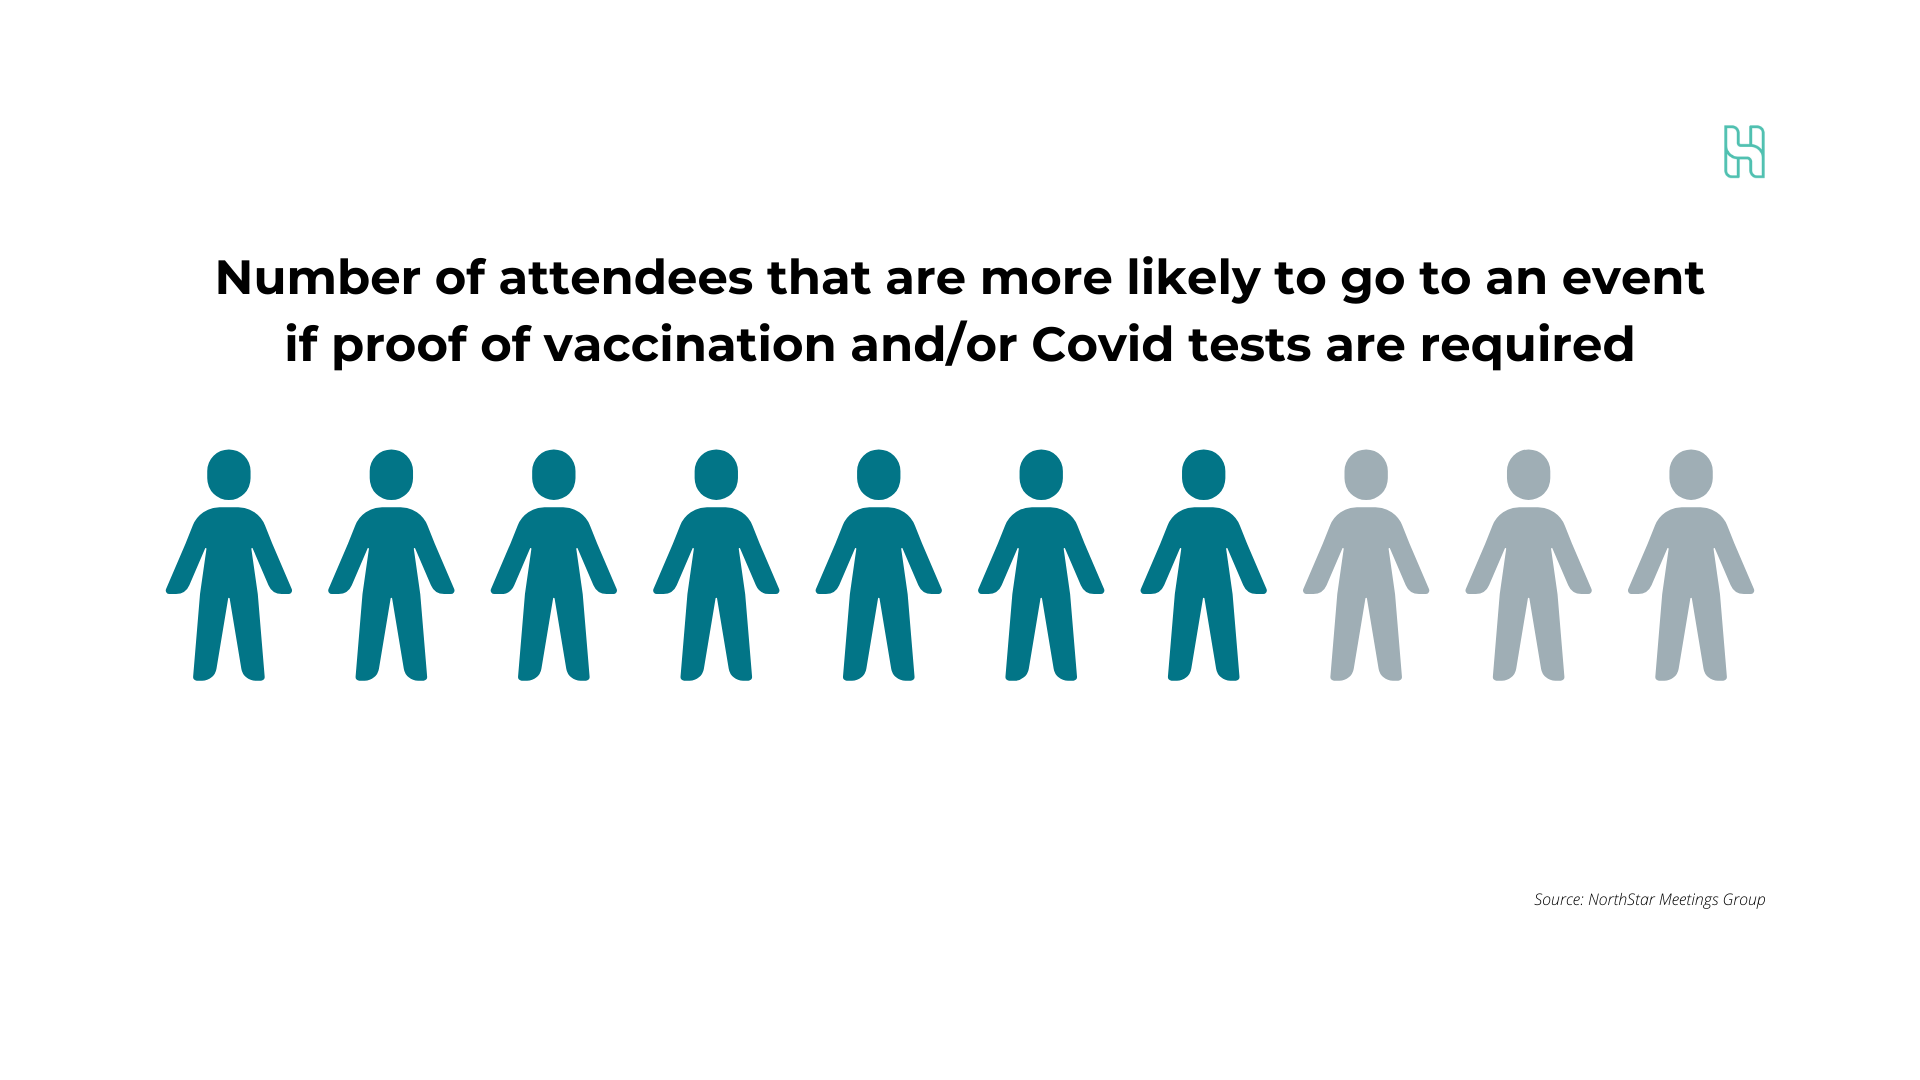 Attendees are more likely to go to an event if proof of vaccination andor Covid tests are required (4)